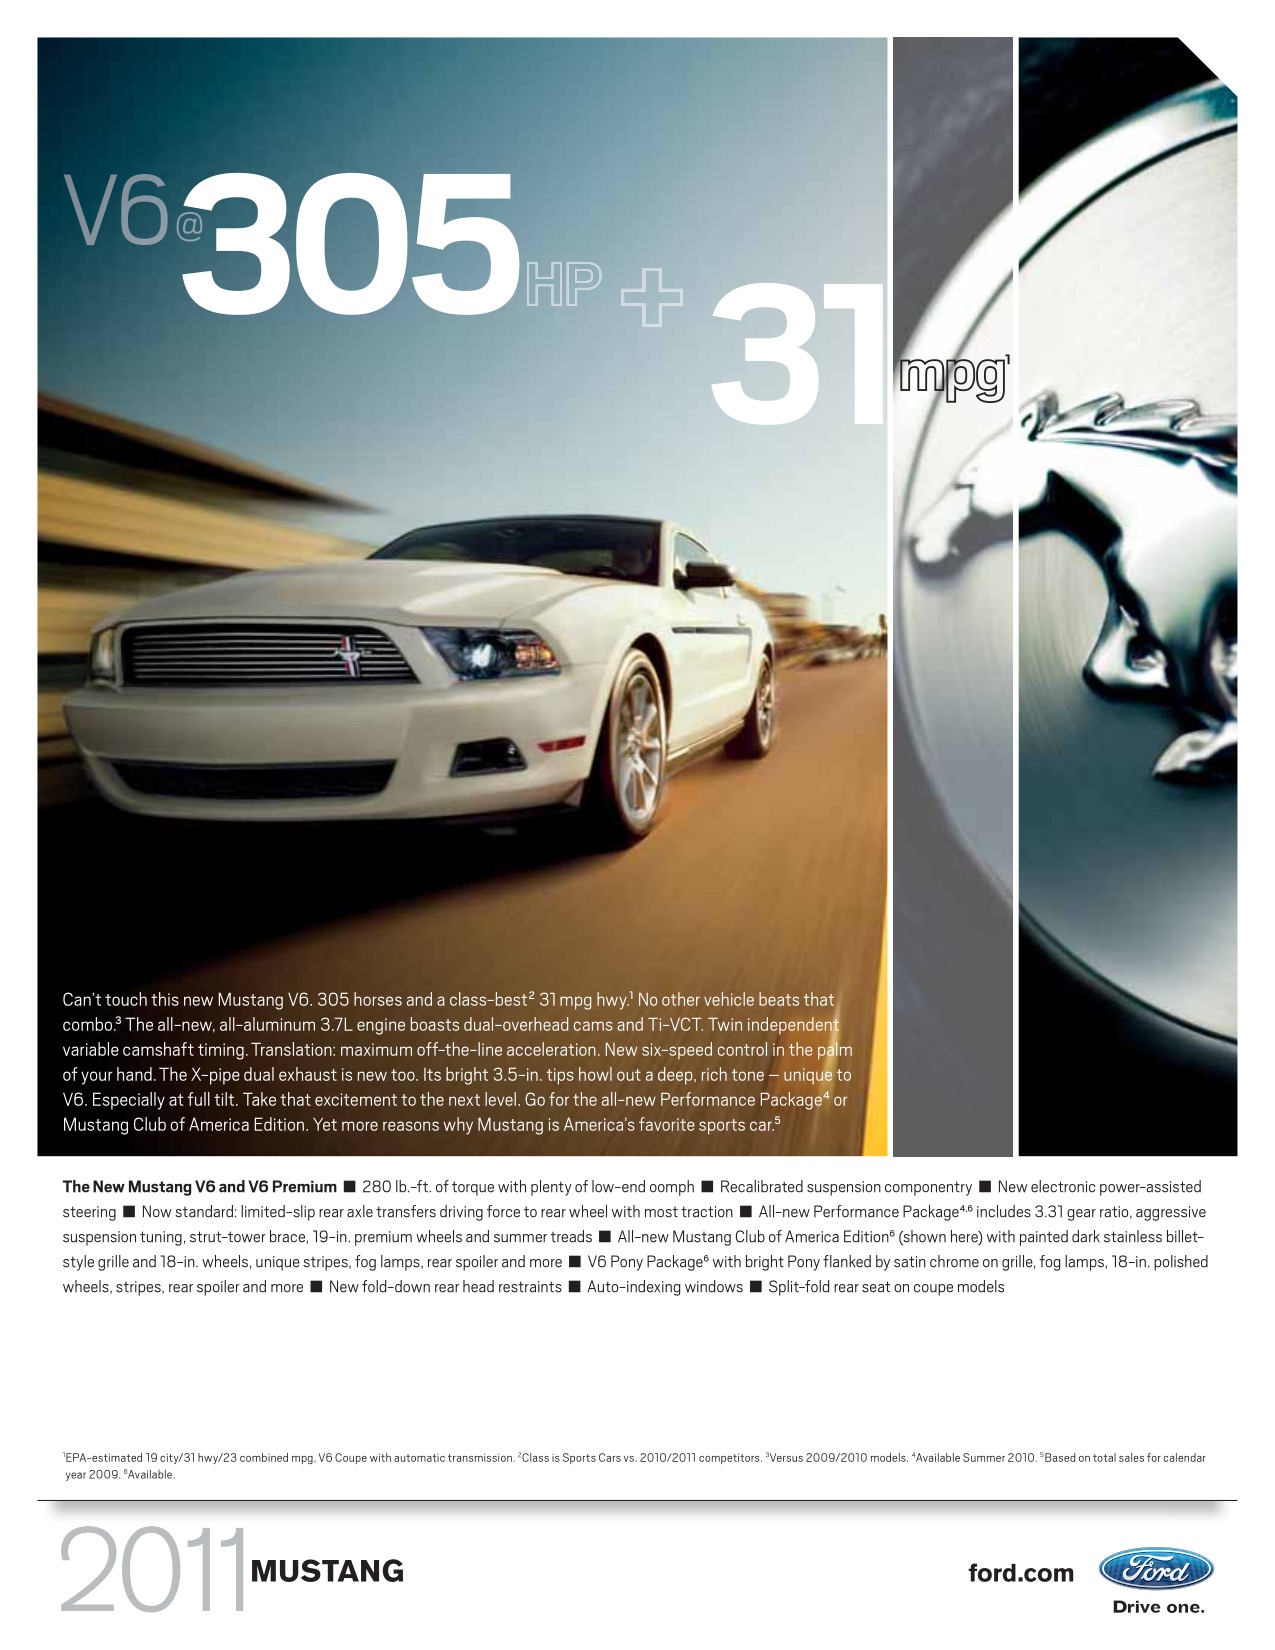 2011 Ford Mustang Brochure Page 6